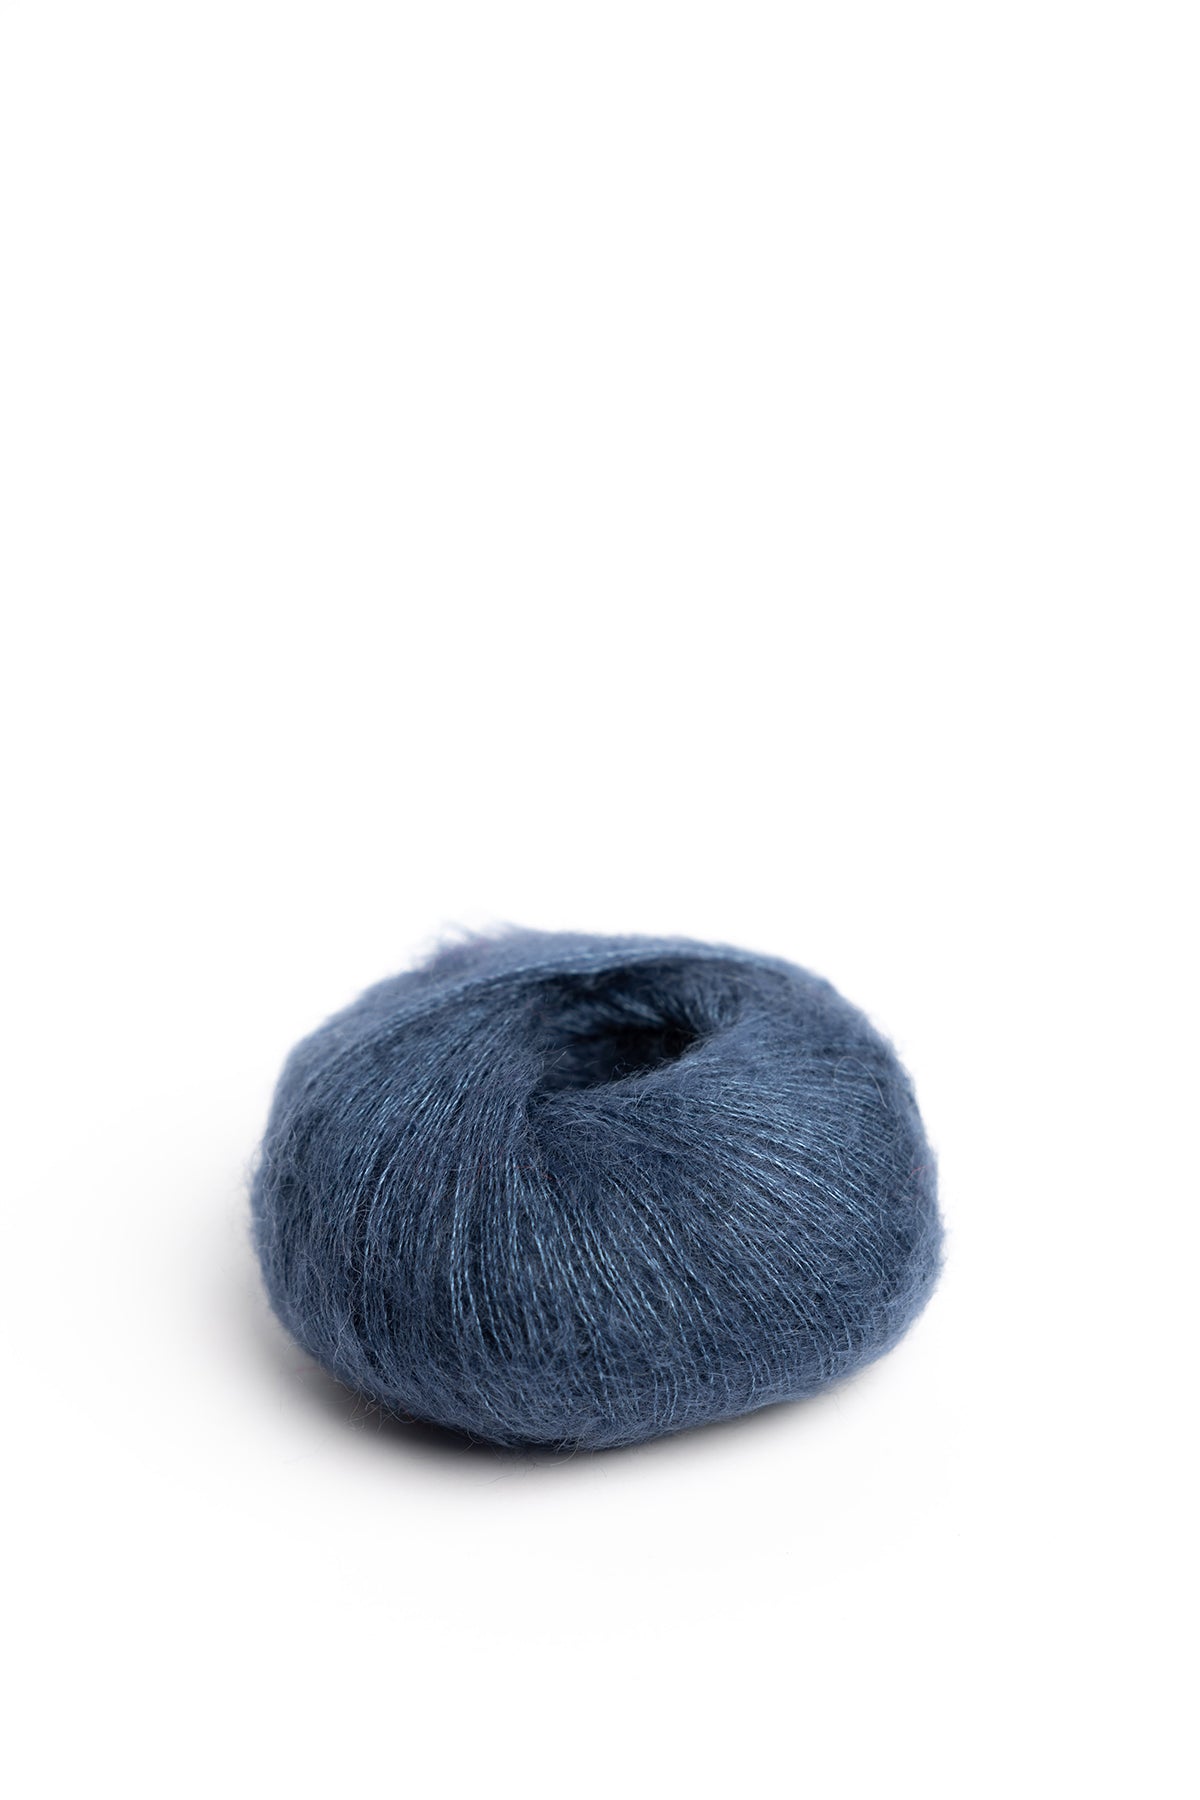 Soft Silk Mohair Knitting For Olive  Shop Yarn Online Today - Beehive Wool  Shop